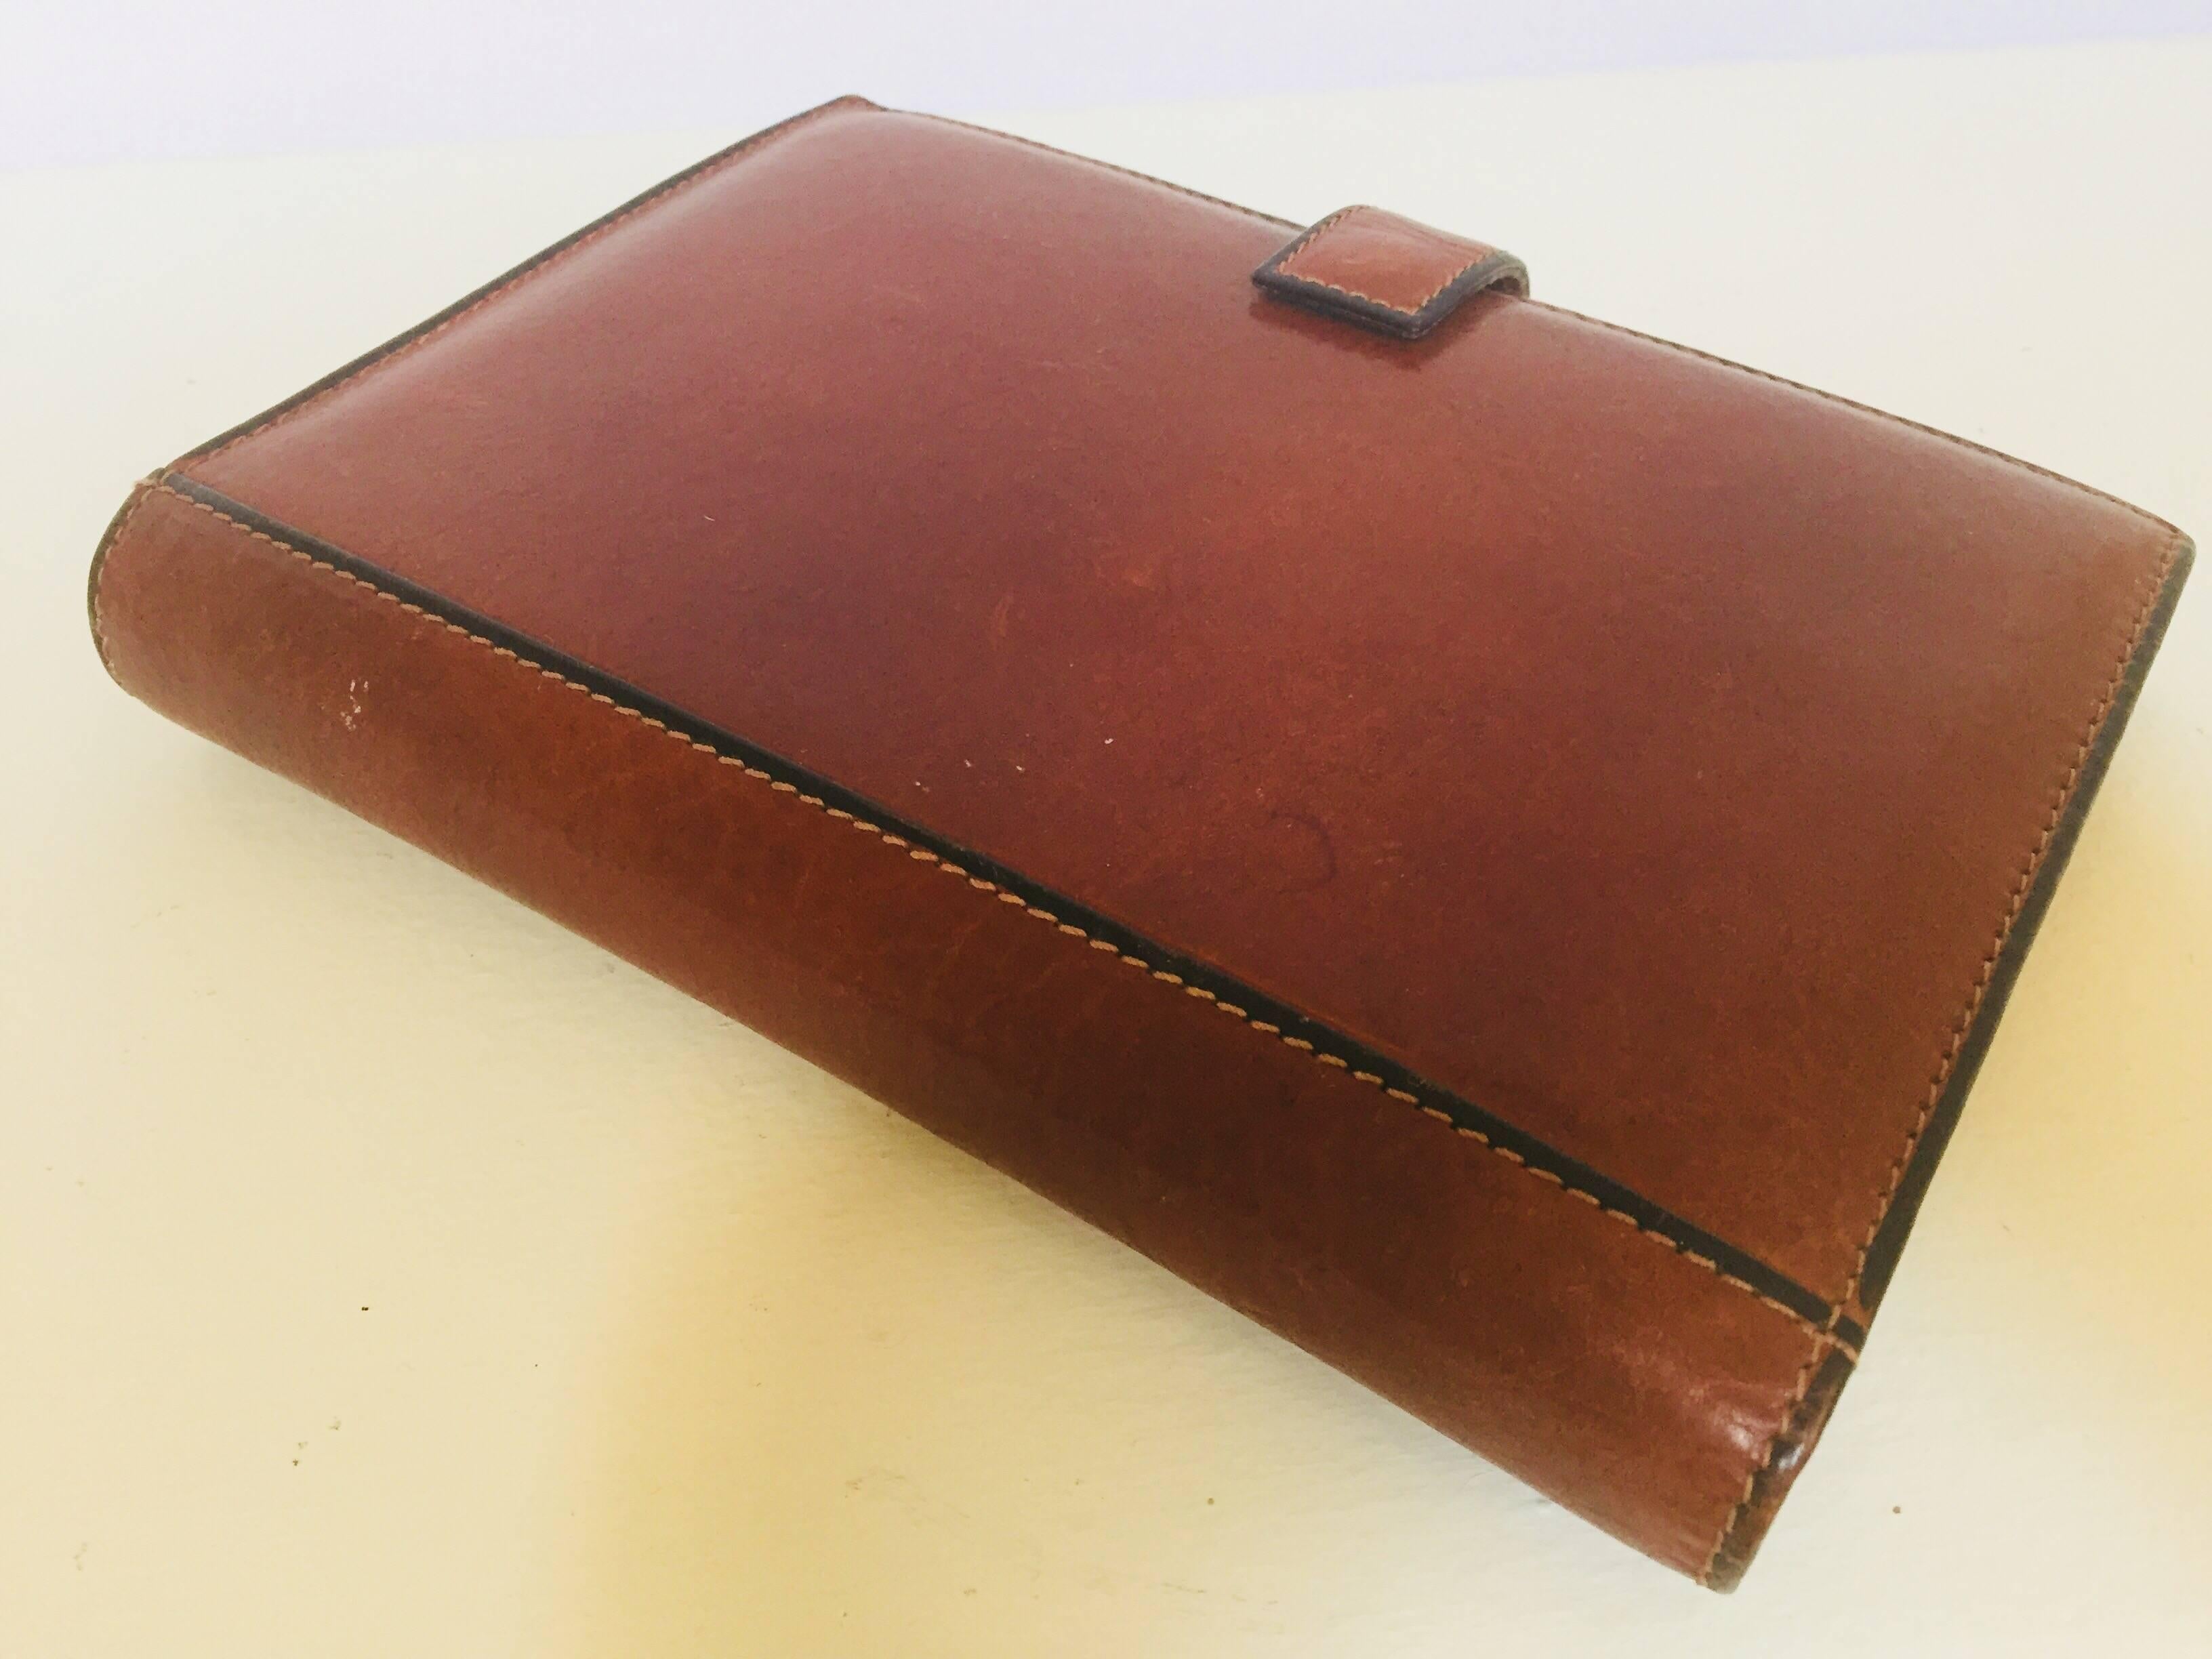 20th Century Vintage Leather Stitched Agenda Refillable by Tumi For Sale